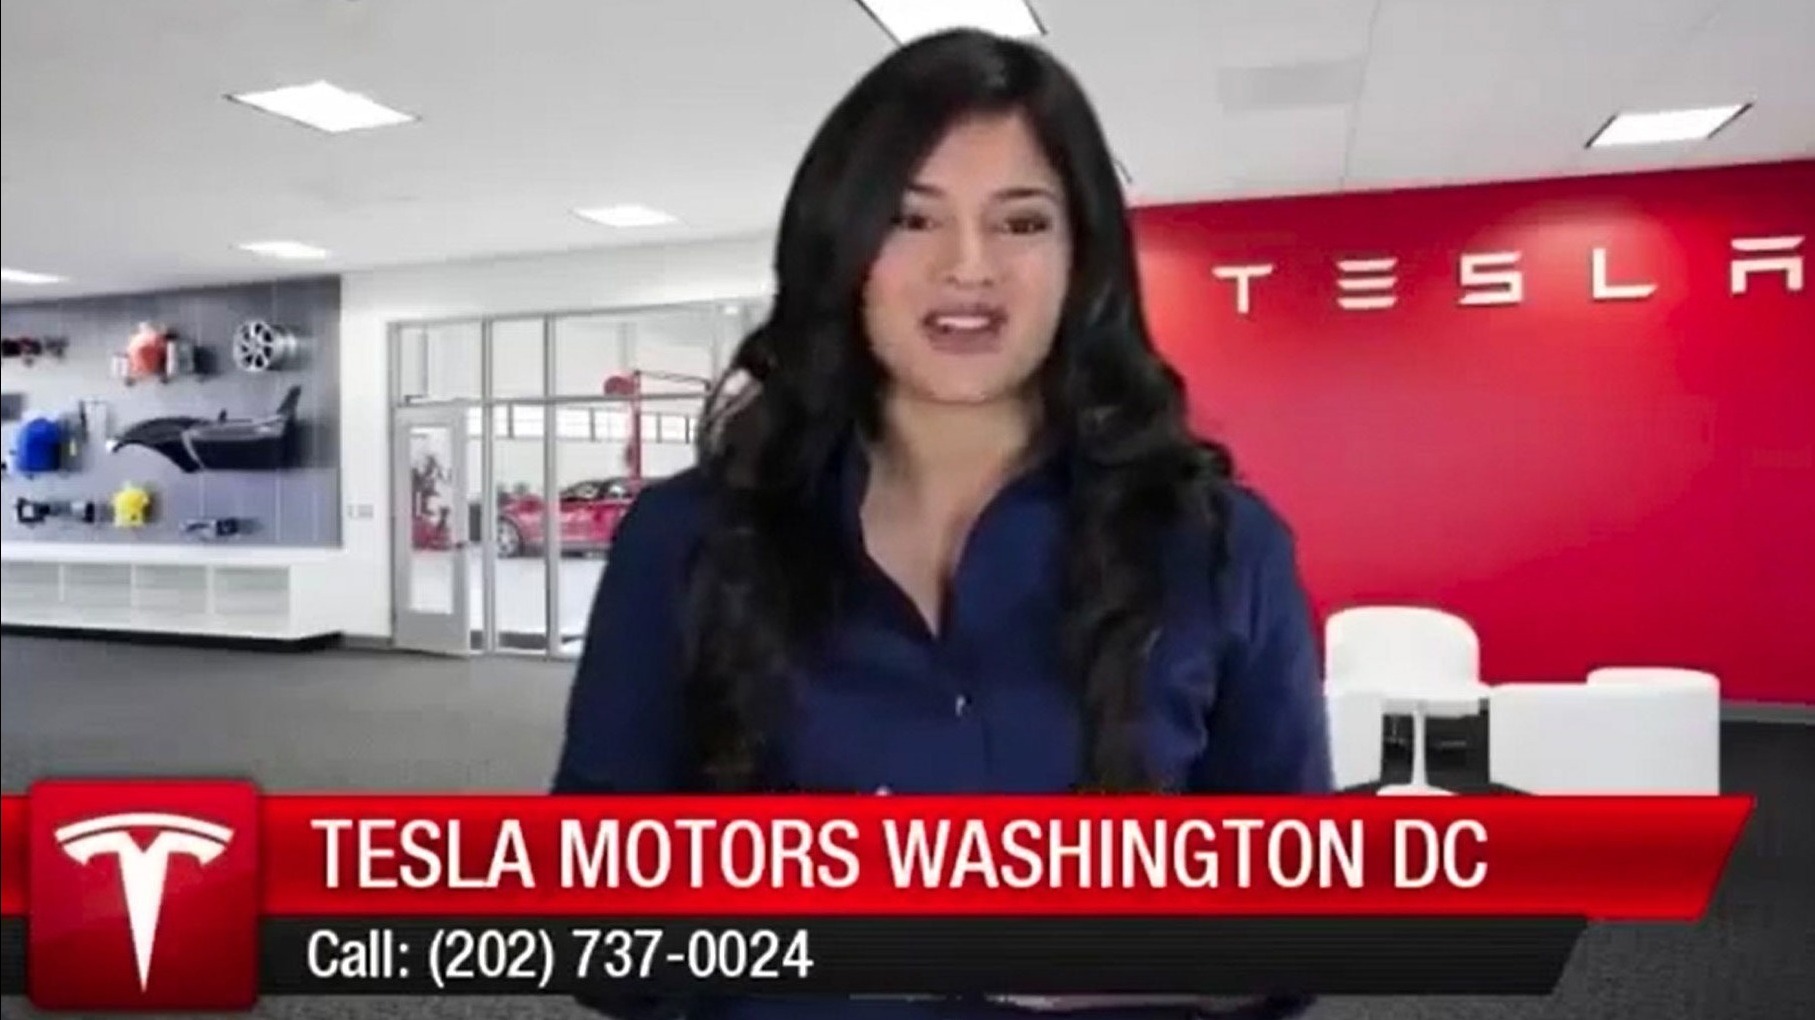 thumbnail of Tesla Motors 60 second review video with spokesmodel.